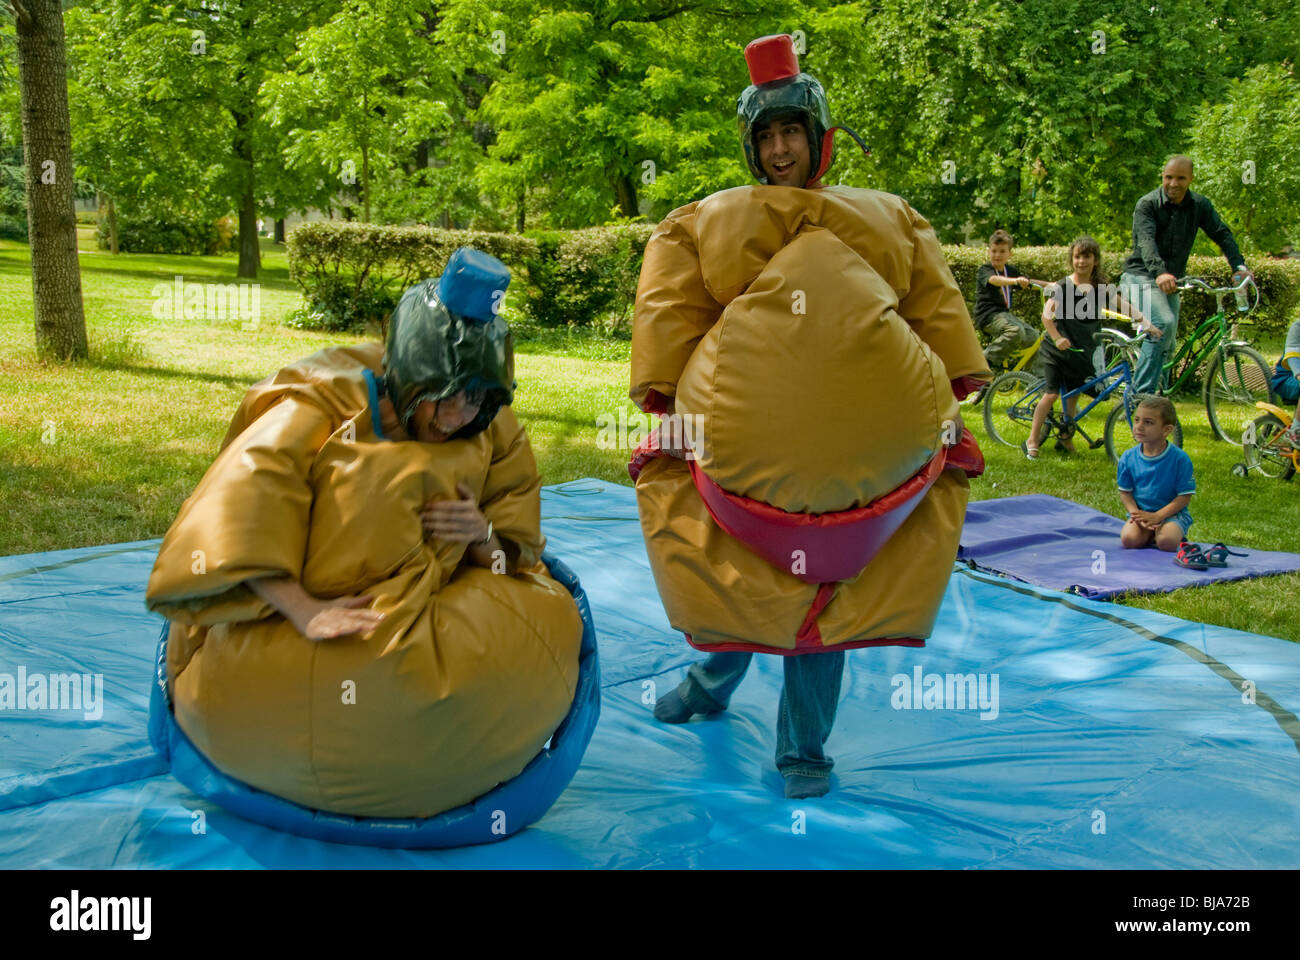 Paris, France, Public Parks, Young People Play Fighting, Two Sumo Wrestlers in Costume Fighting Outside Stock Photo